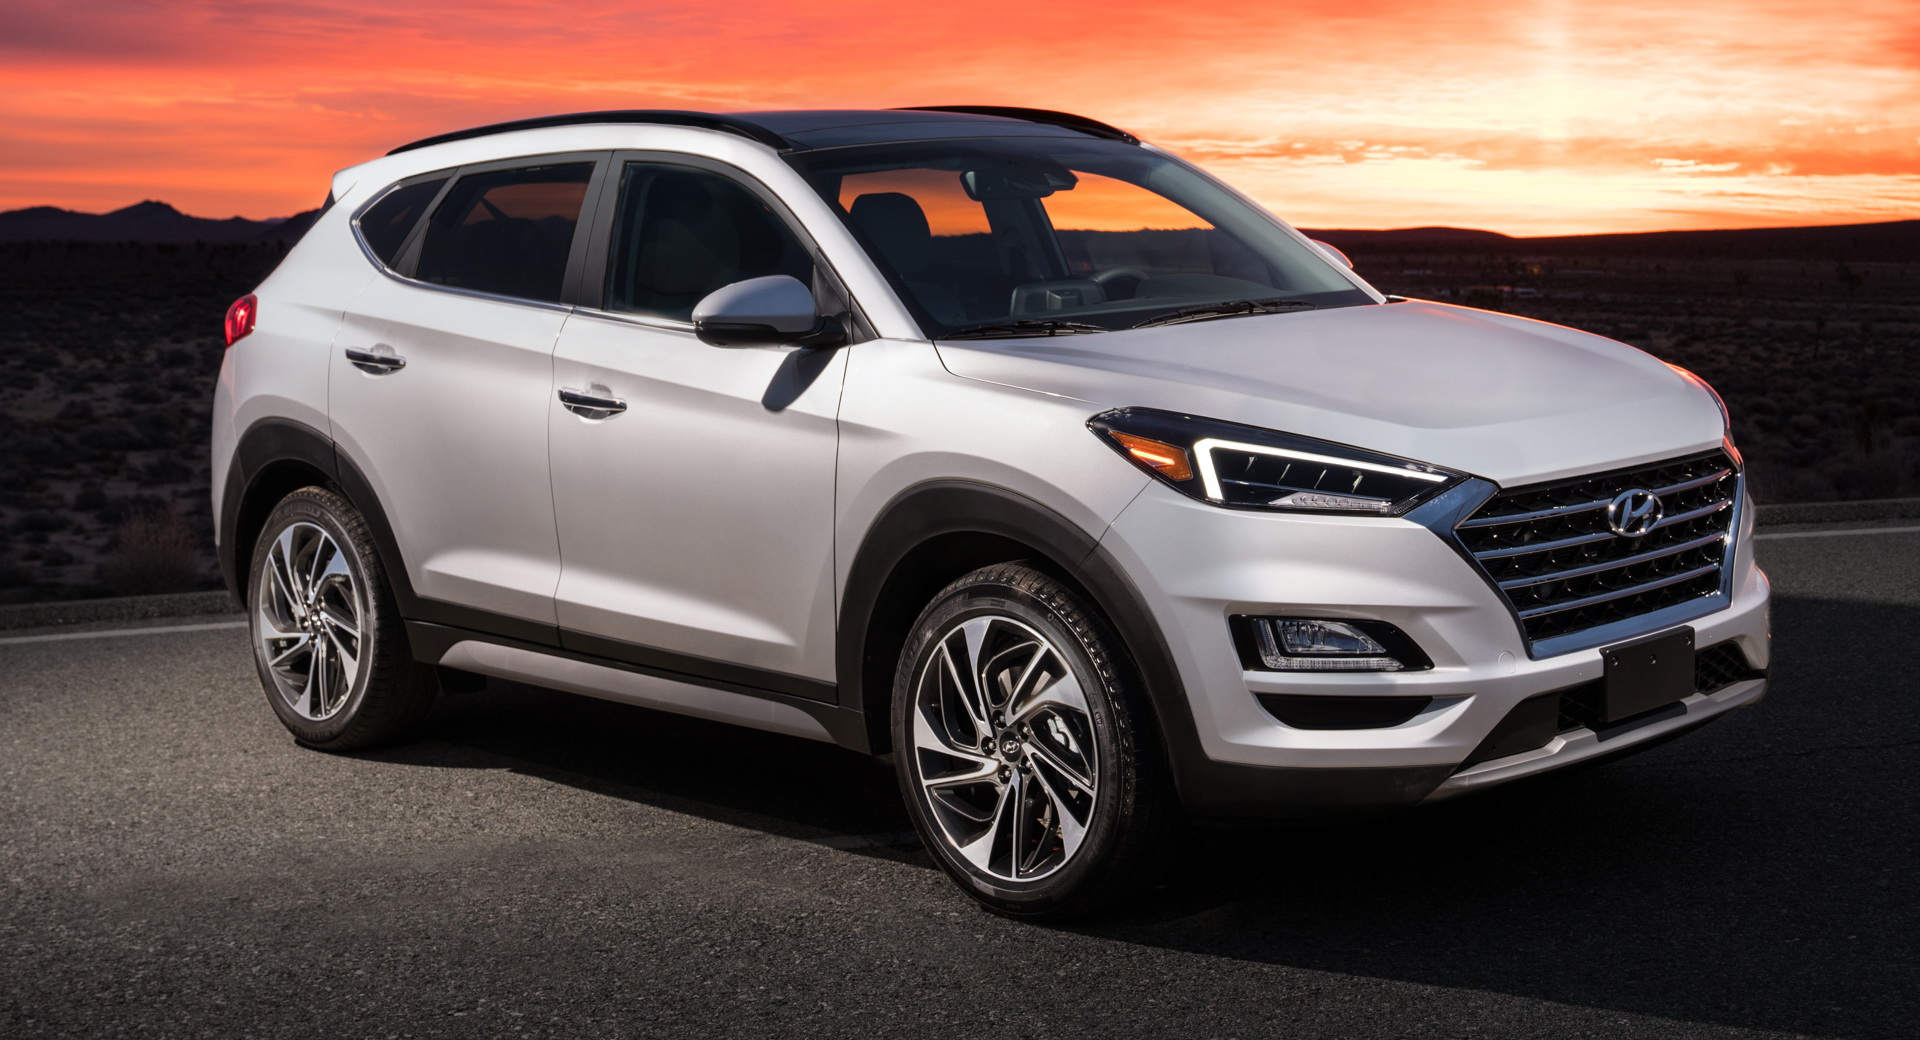 2020MY Hyundai Tucson Gets Refreshed Color Palette And Safety Gear |  Carscoops